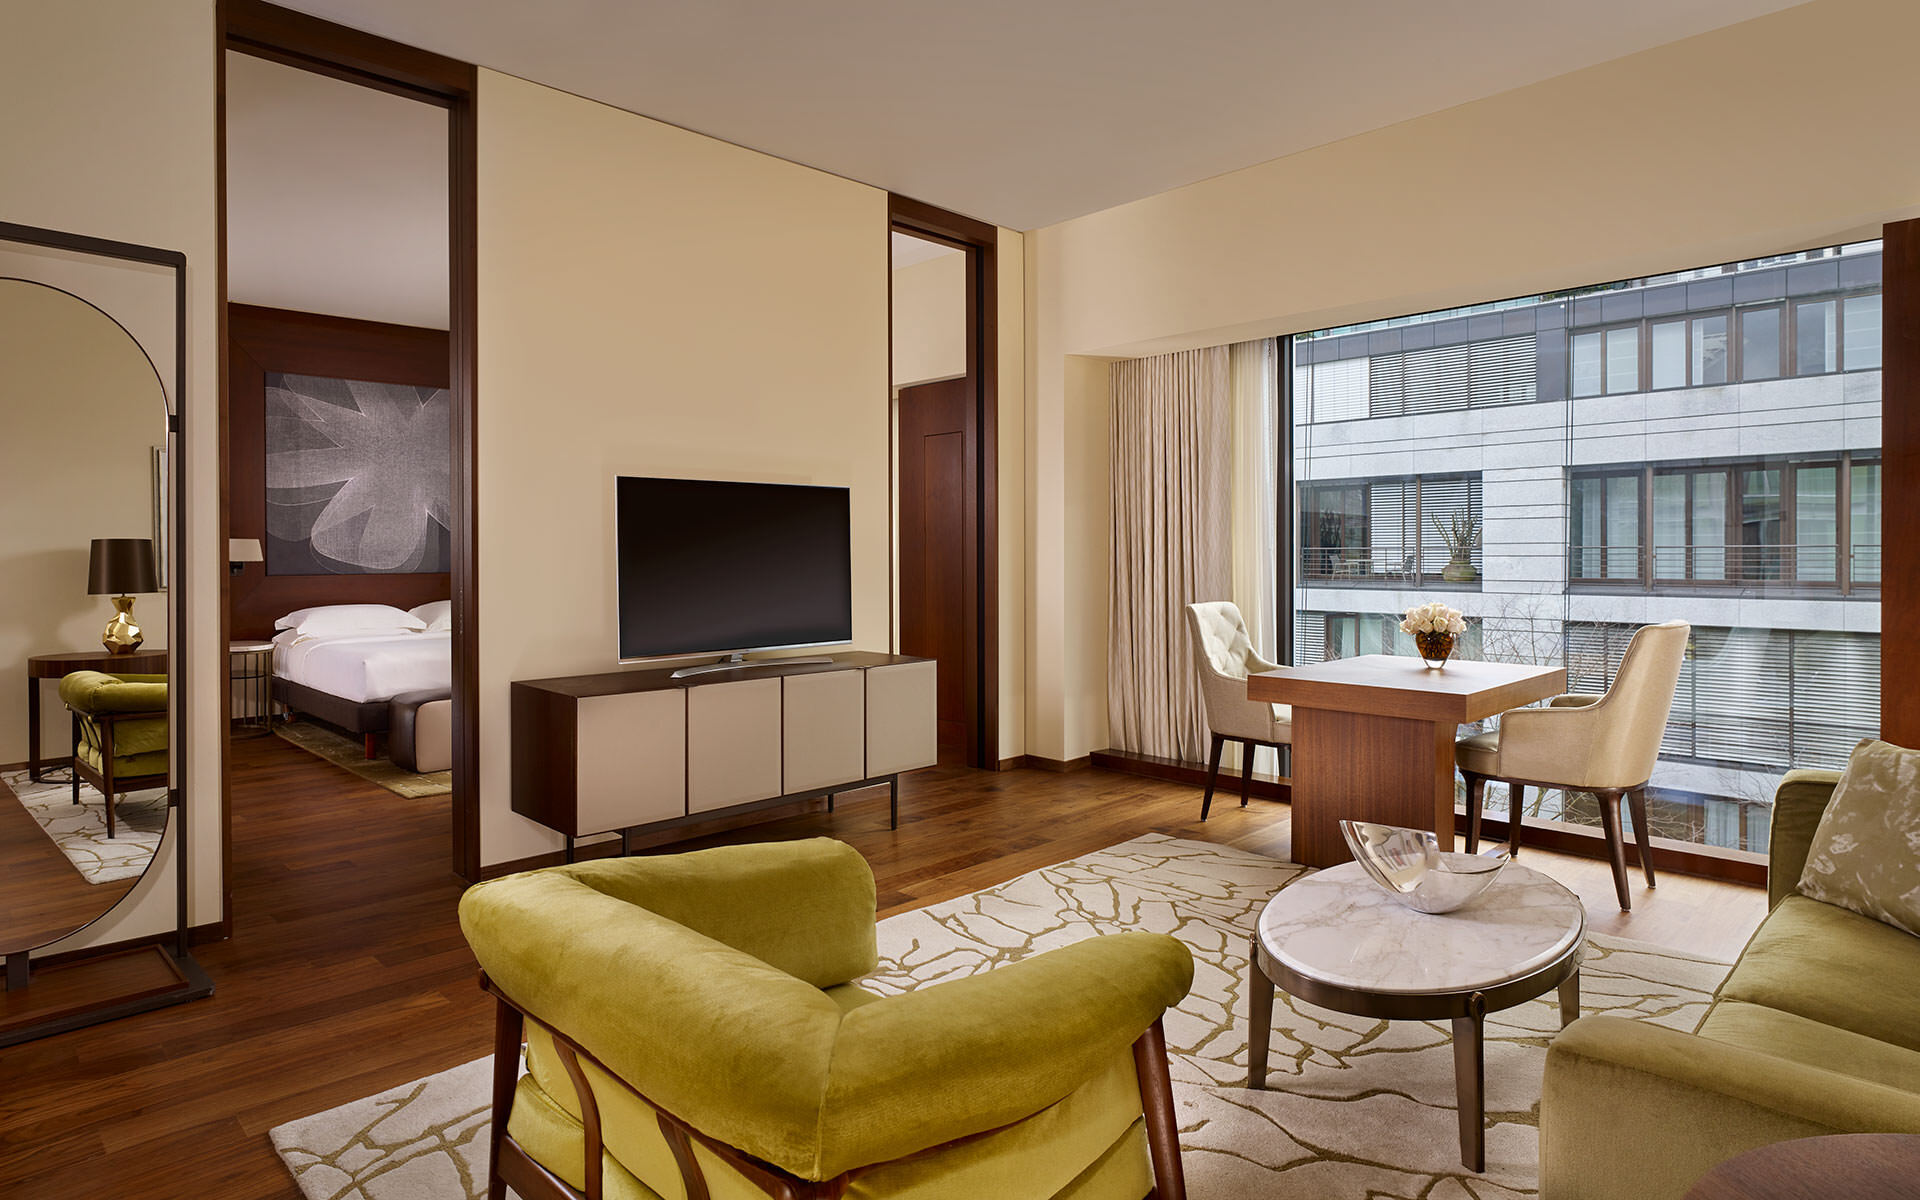 Matthew Shaw Photography hotel suite image